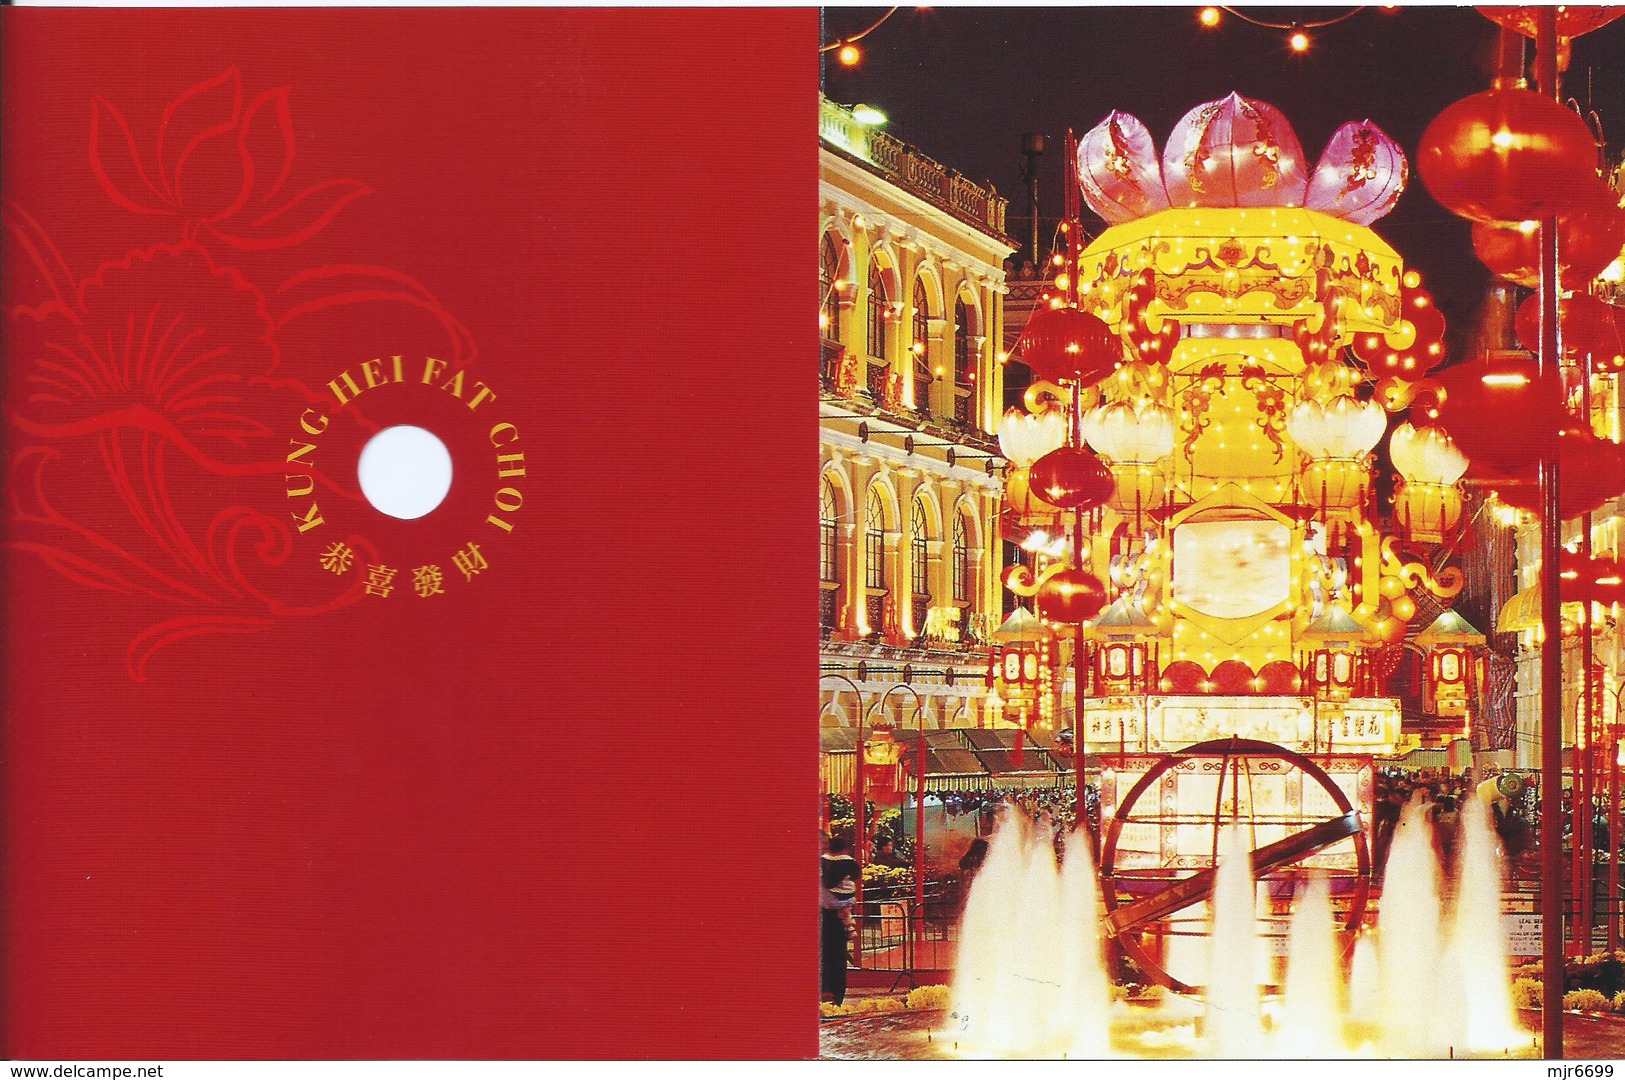 MACAU 1999 NEW YEAR GREETING CARD & POSTAGE PAID COVER, POST OFFICE CODE #BPK005 - Enteros Postales